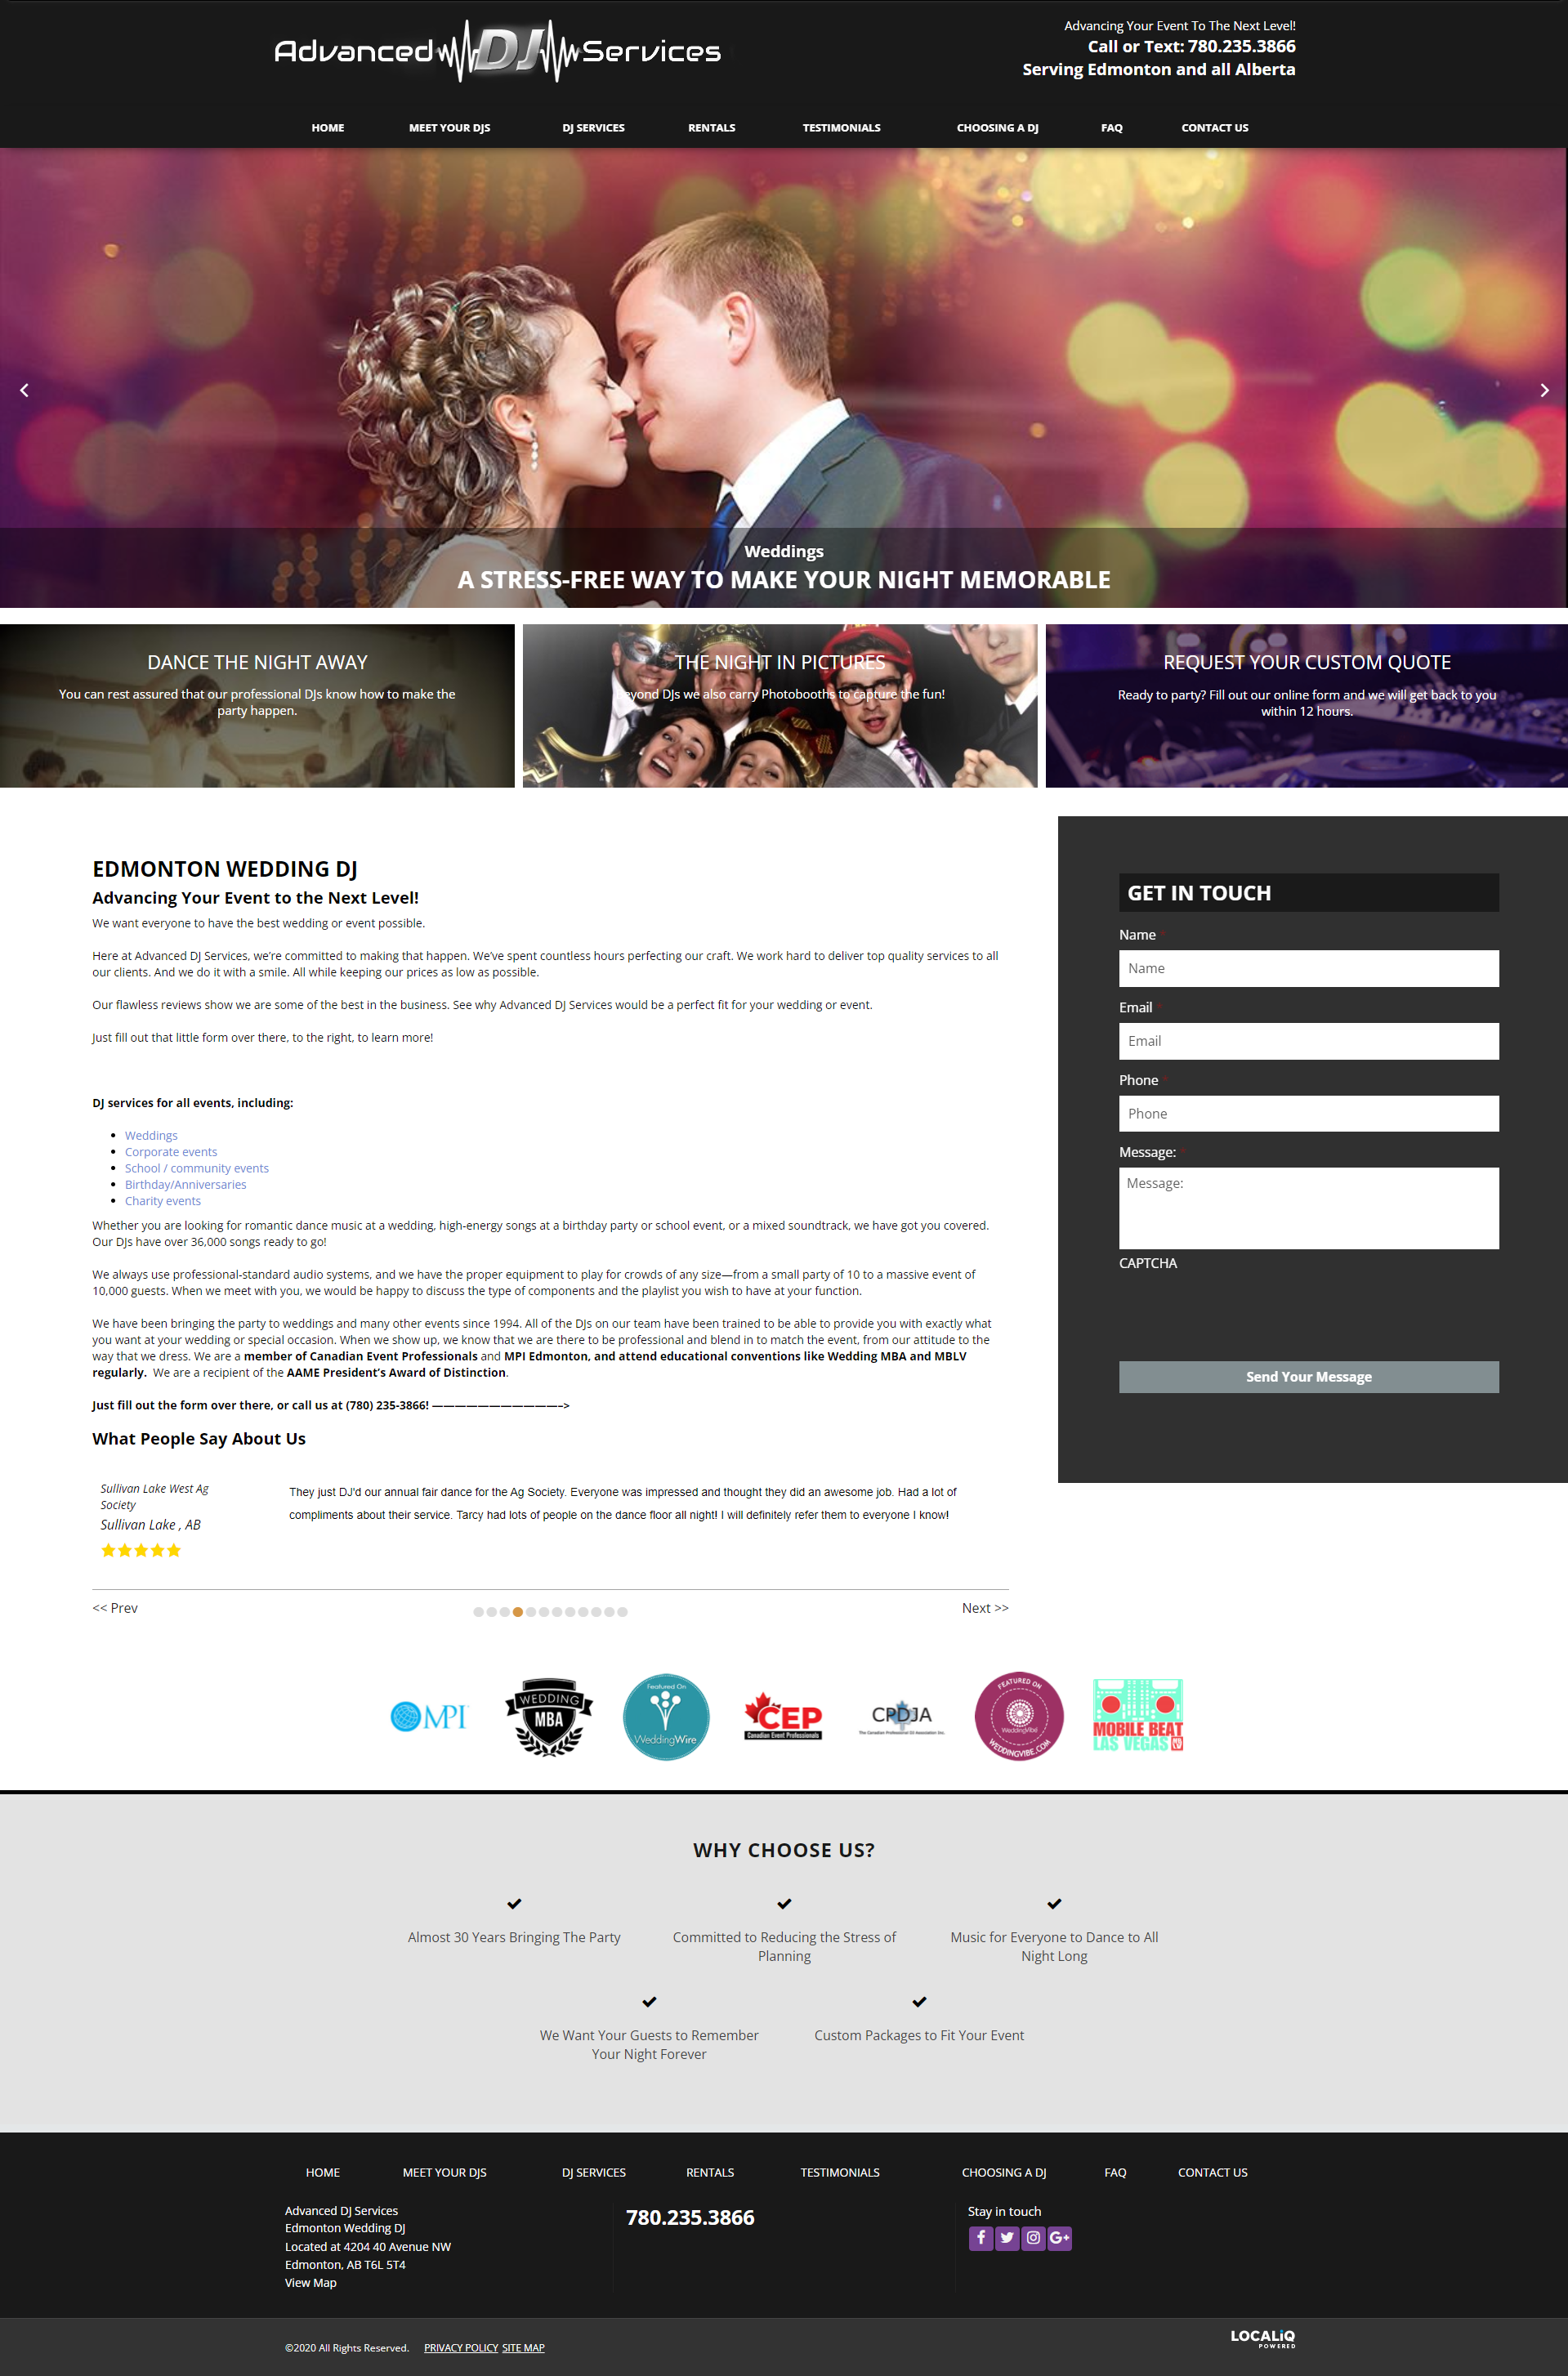 A visually stunning and user-friendly website design tailored specifically for a wedding business. The website is optimized for search engine optimization (SEO), enhancing its online visibility and attracting more potential clients.